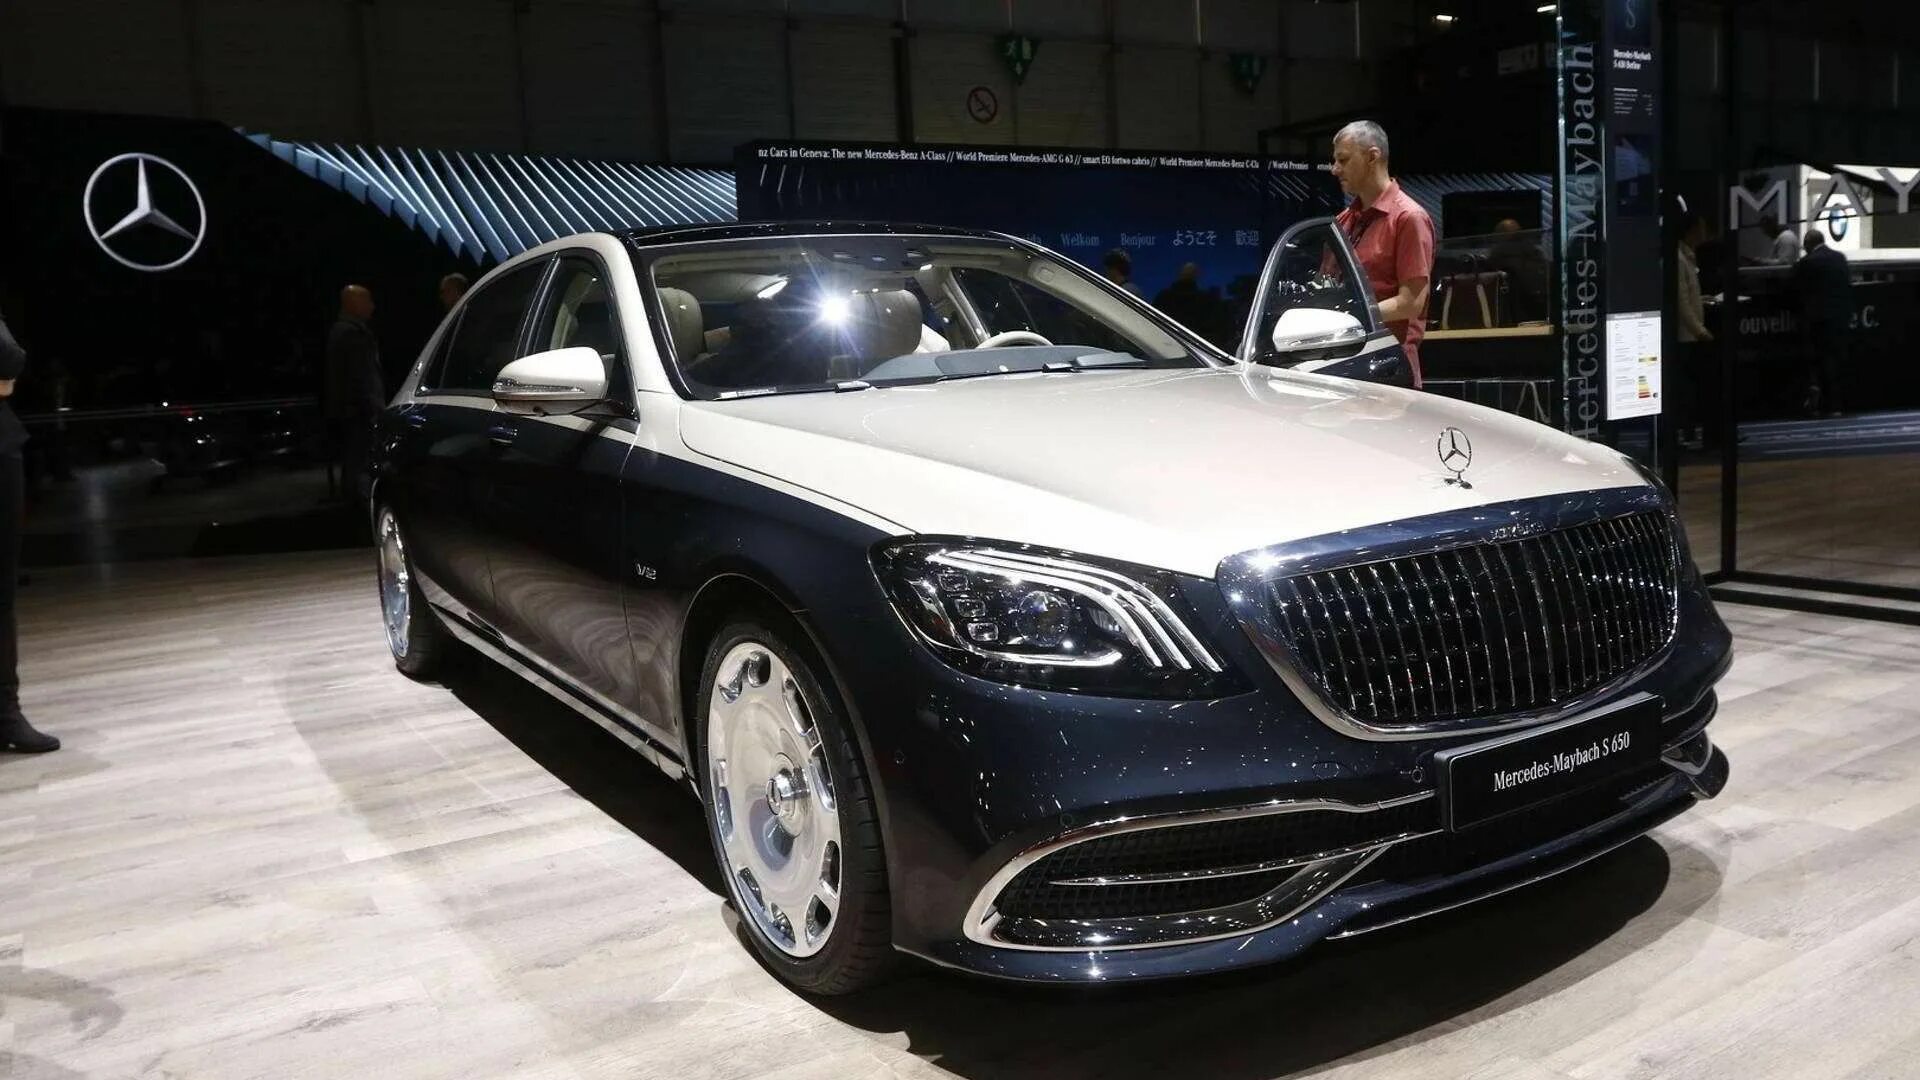 Mercedes Maybach 2019. Мерседес-Майбах s 2019. Mercedes Benz s class Maybach 2019. Mercedes-Maybach s 560. Mercedes майбах